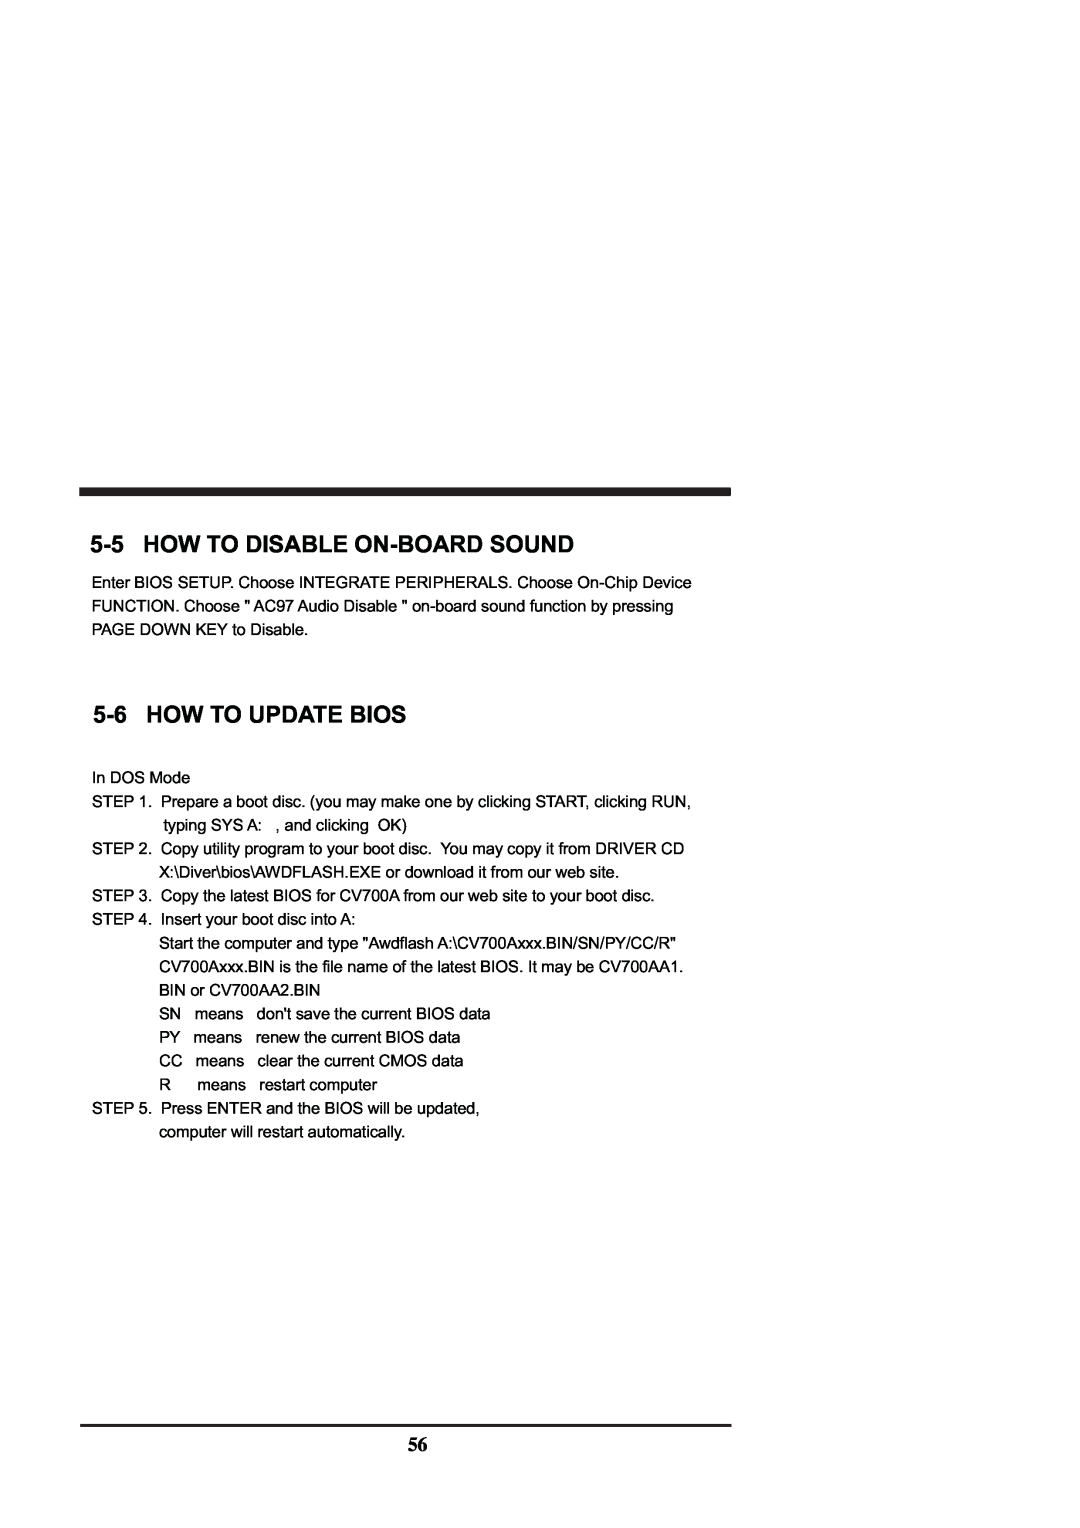 Intel CV702A, CV700A manual 5-5HOW TO DISABLE ON-BOARDSOUND, 5-6HOW TO UPDATE BIOS 